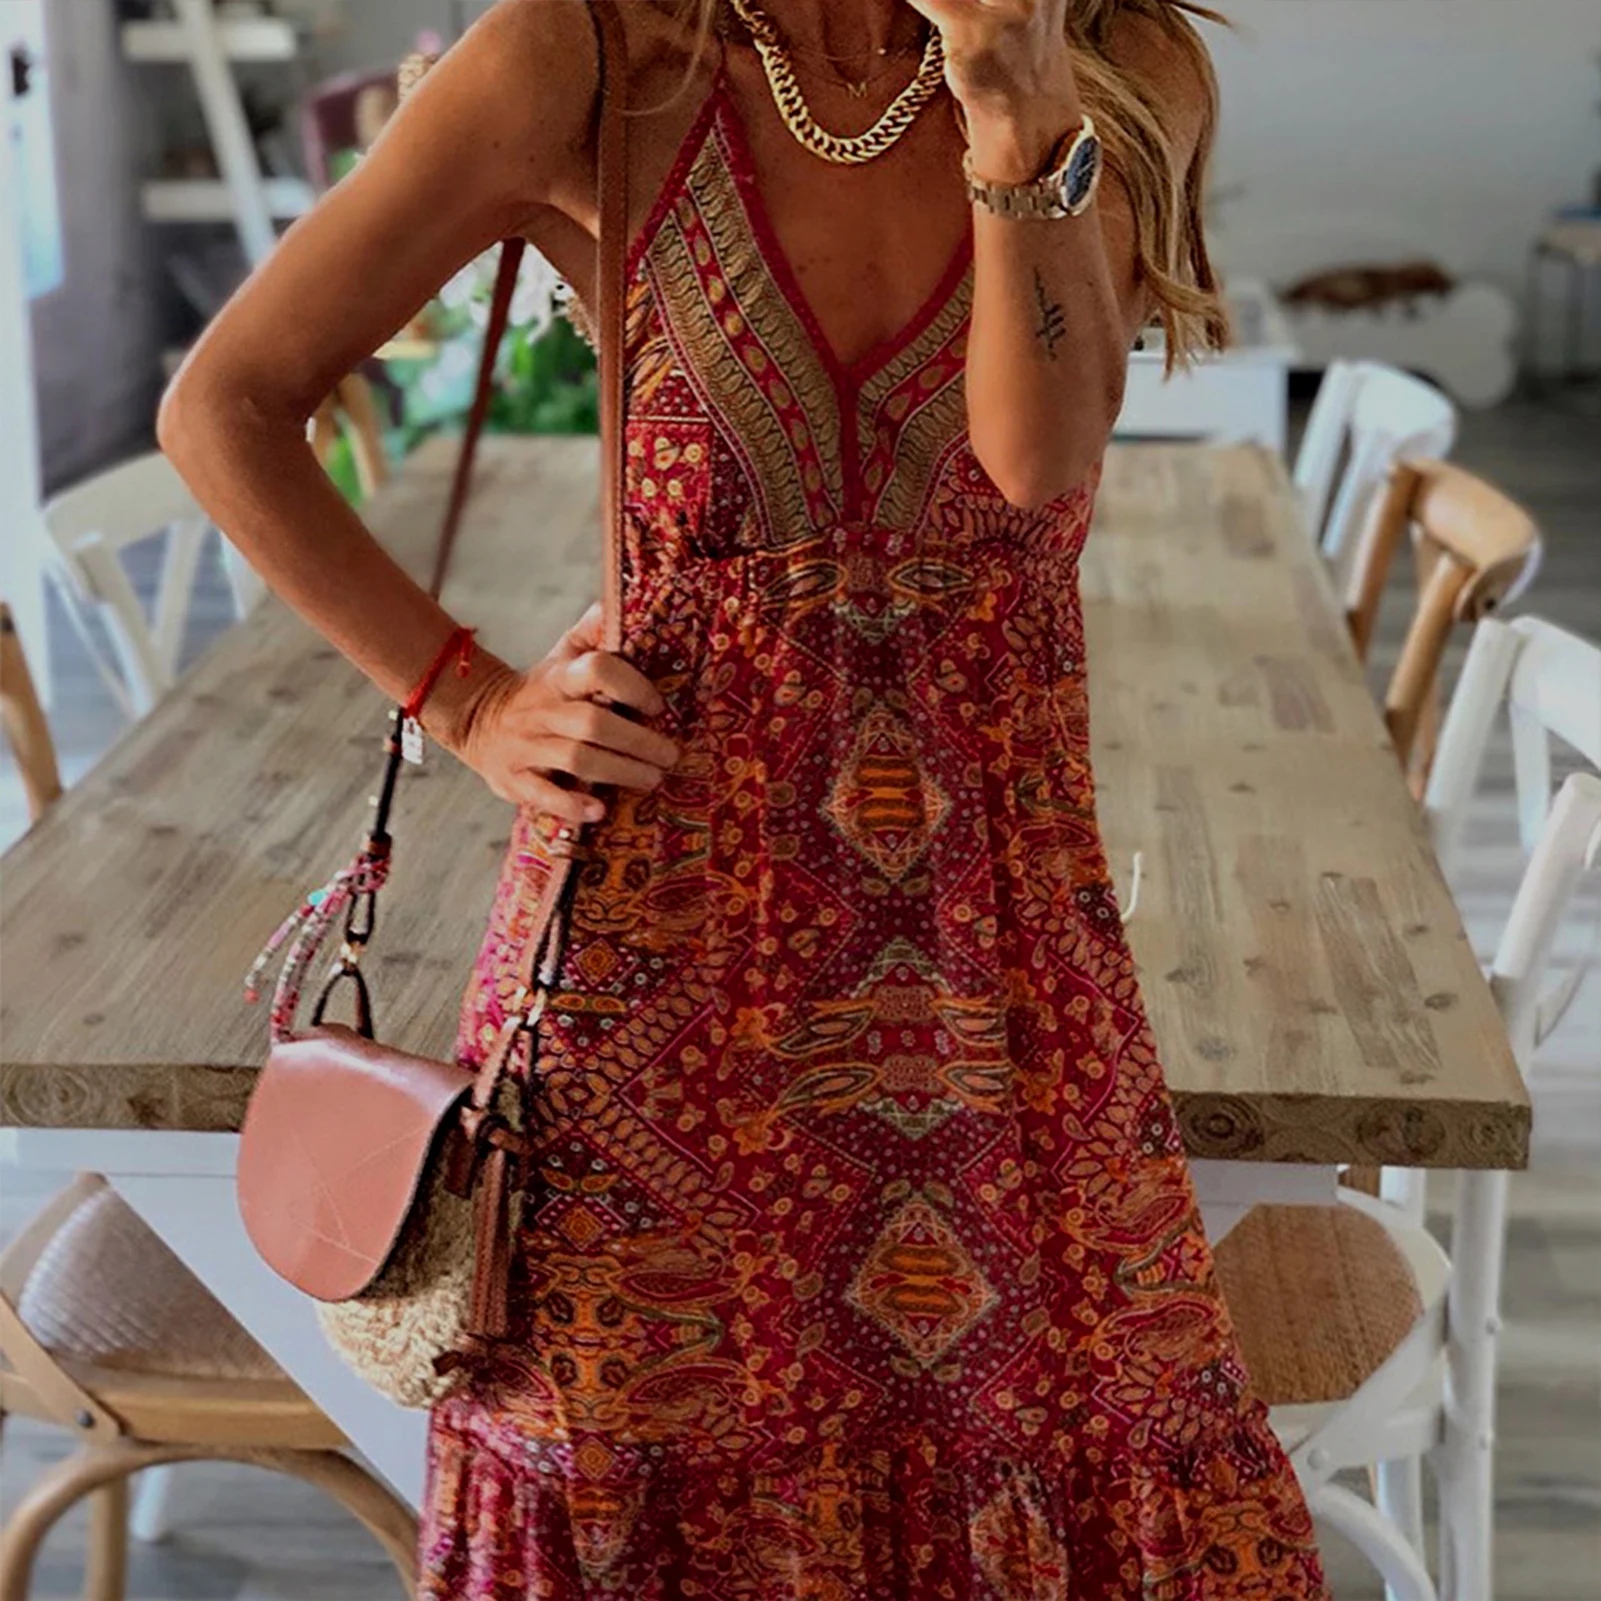 

Printed Womens Boho Dress V-Neck Summer Loose Dress European Fashion Casual Large Swing Simple Temperament for Weekend Vacation